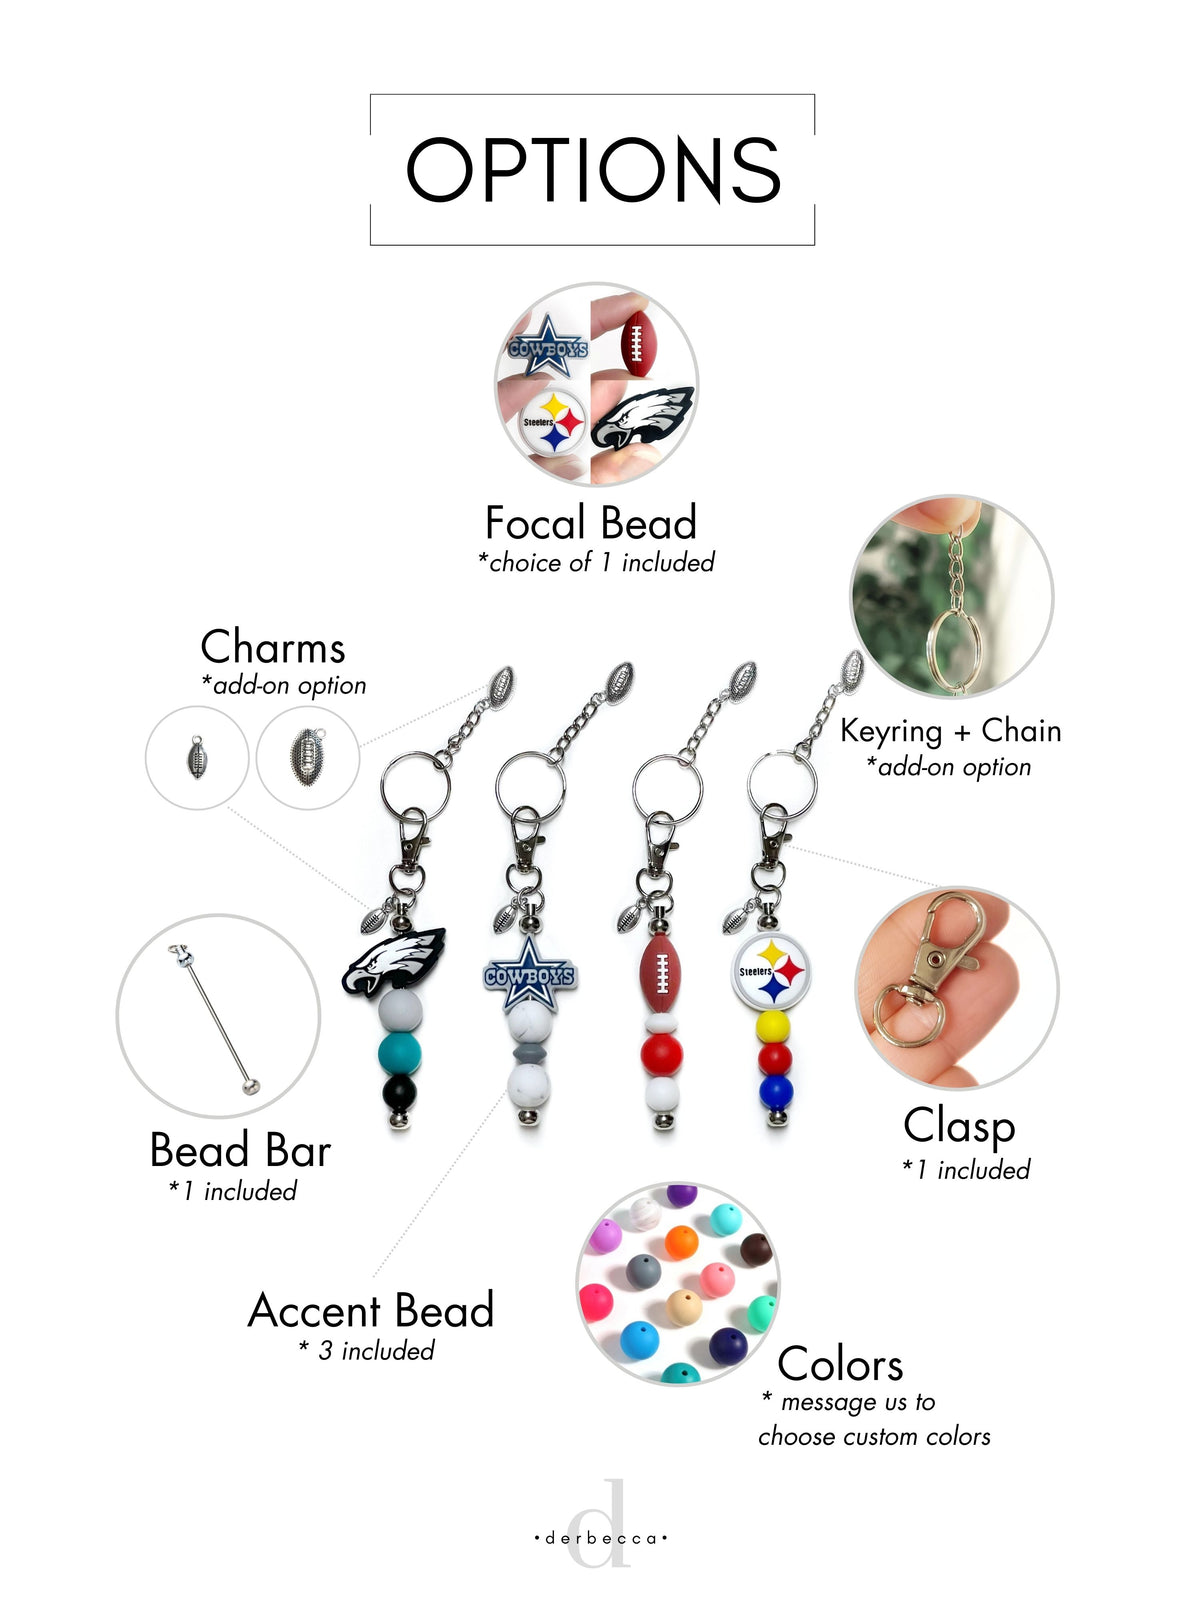 Create Your Own Personalized Custom Keychain Keyring Charm Accessory Clip On Sports Fan Football Eagles Steelers Cowboys including Beadable Bar Bead Bar and your choice of team colors in the silicone beads